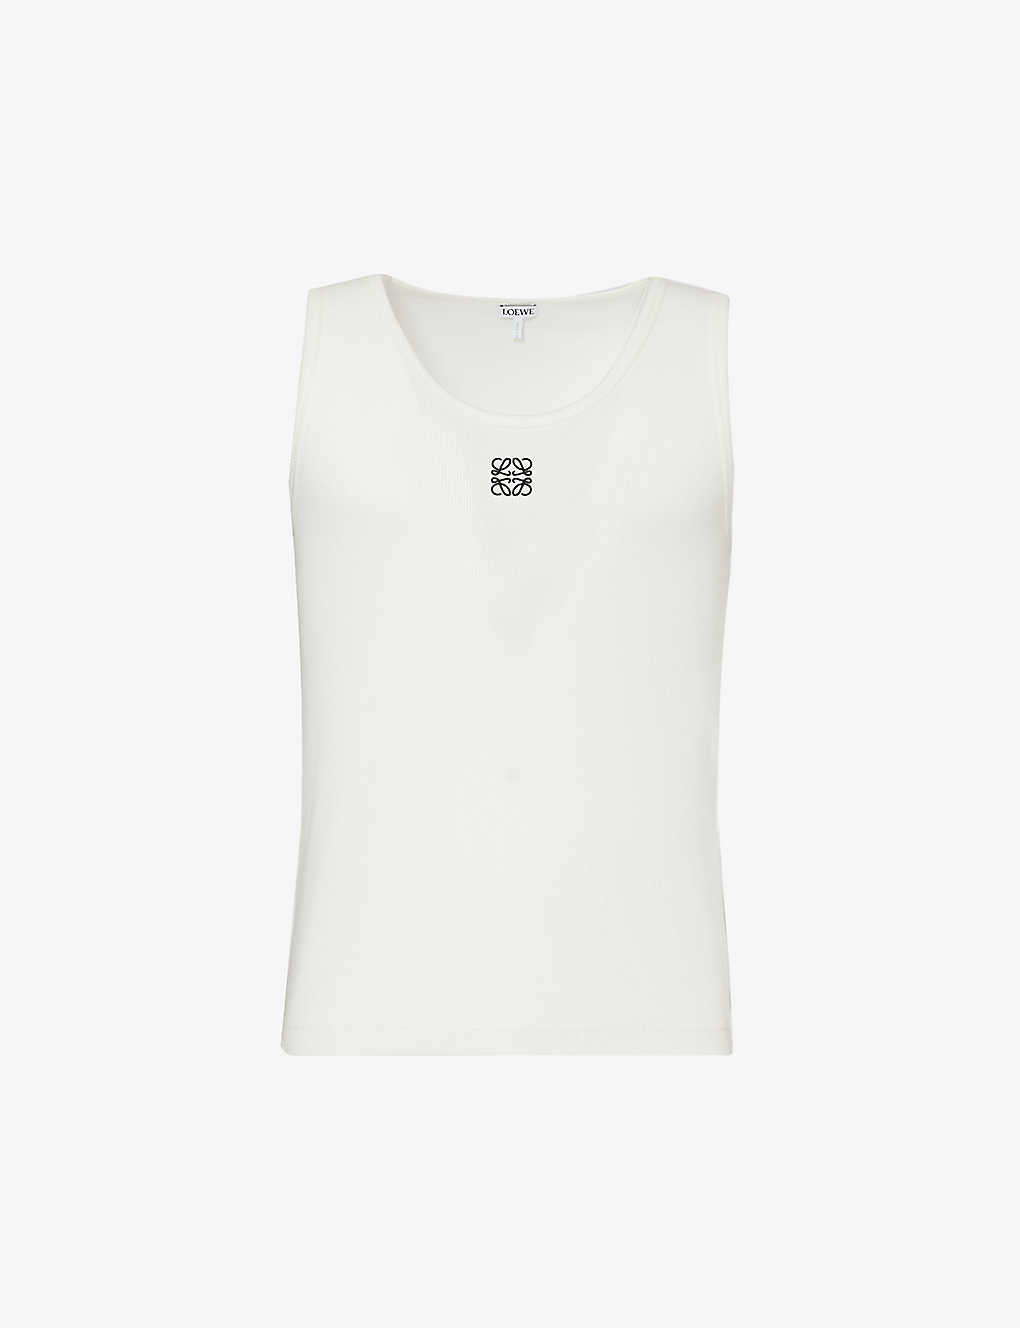 Shop Loewe Men's White Anagram Brand-embroidered Stretch-cotton Top